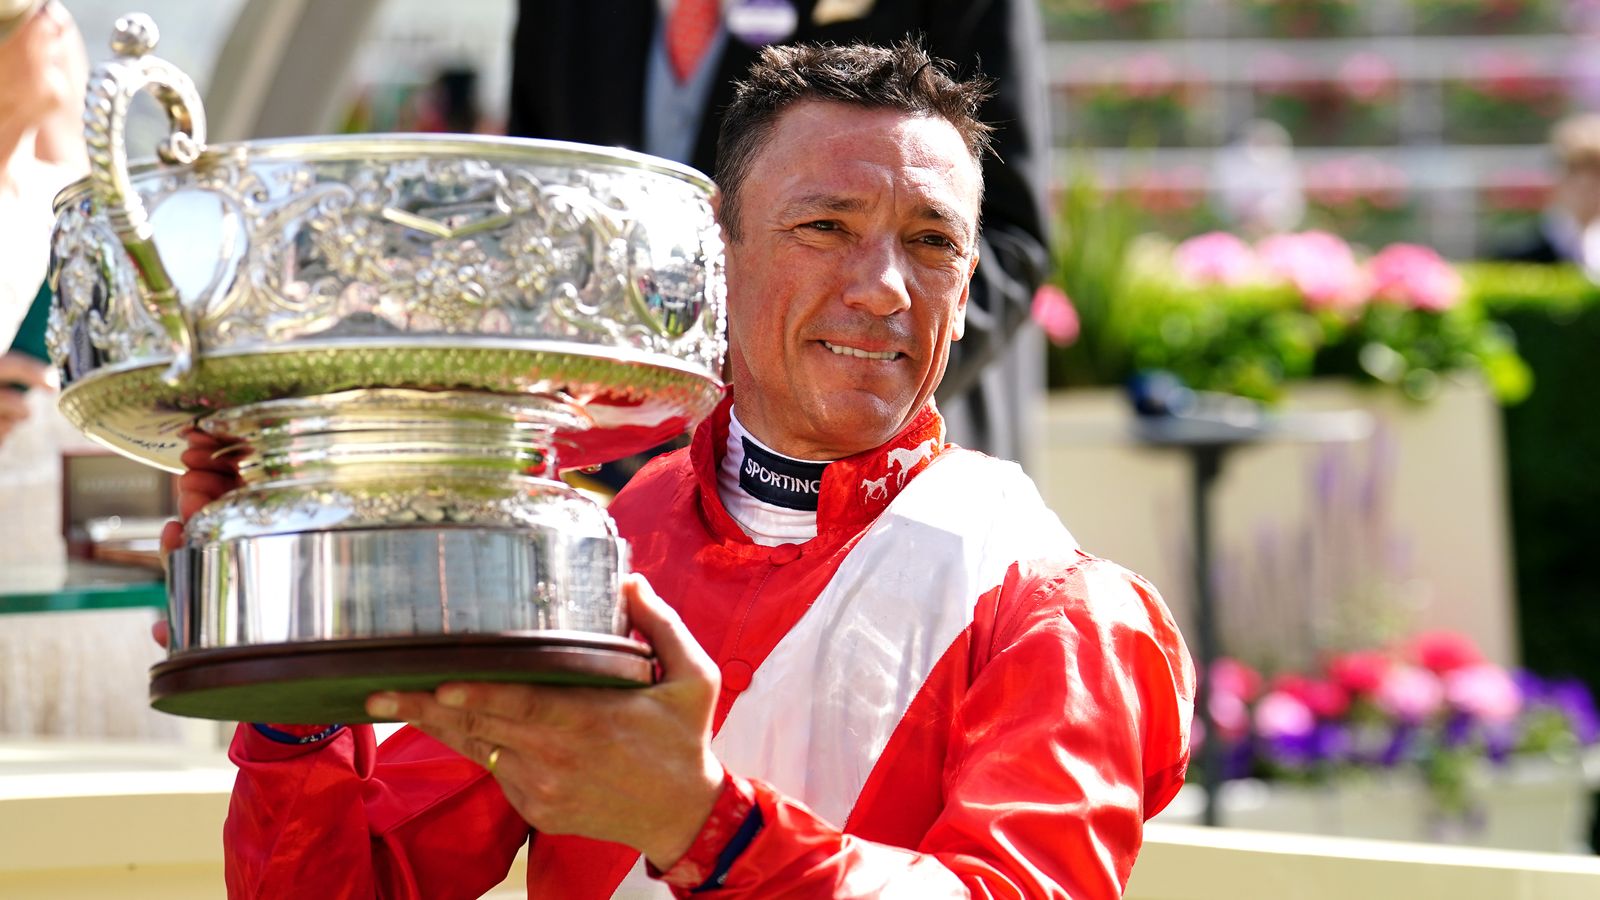 Royal Ascot: Inspiral dominates Coronation Stakes as Frankie Dettori gets on the board after frustrating week